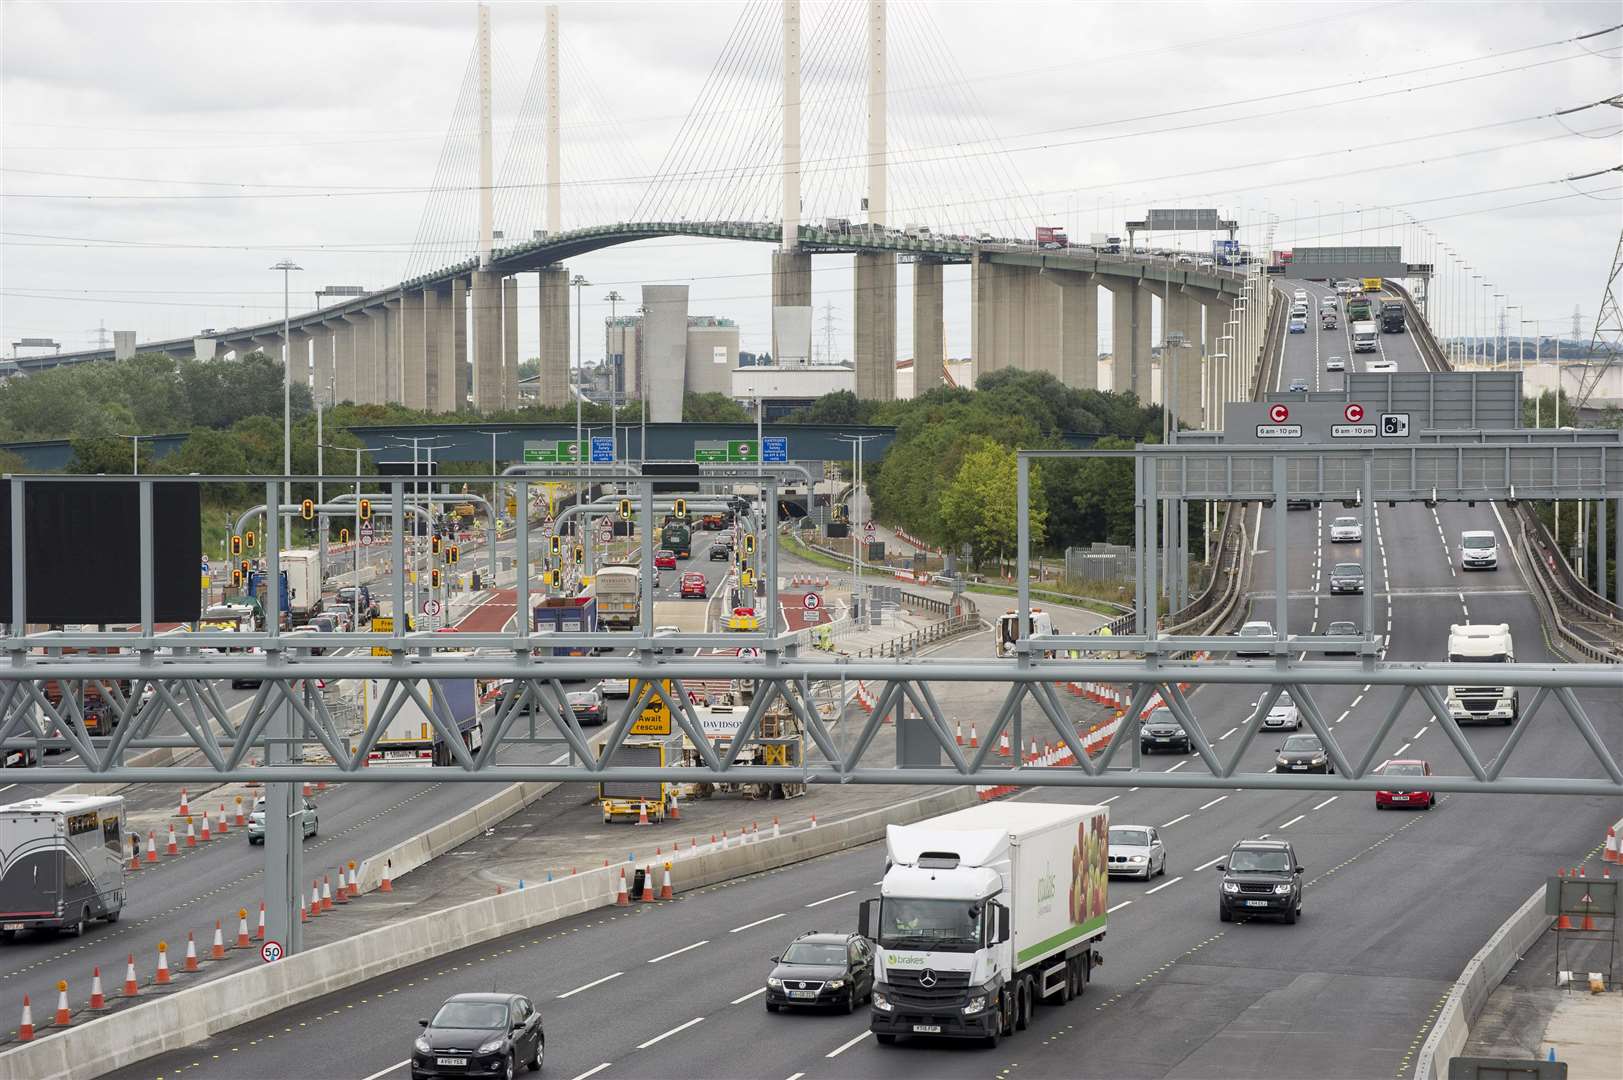 Views of the approach to the Dartford Crossing, from the Erith bridge on the A206